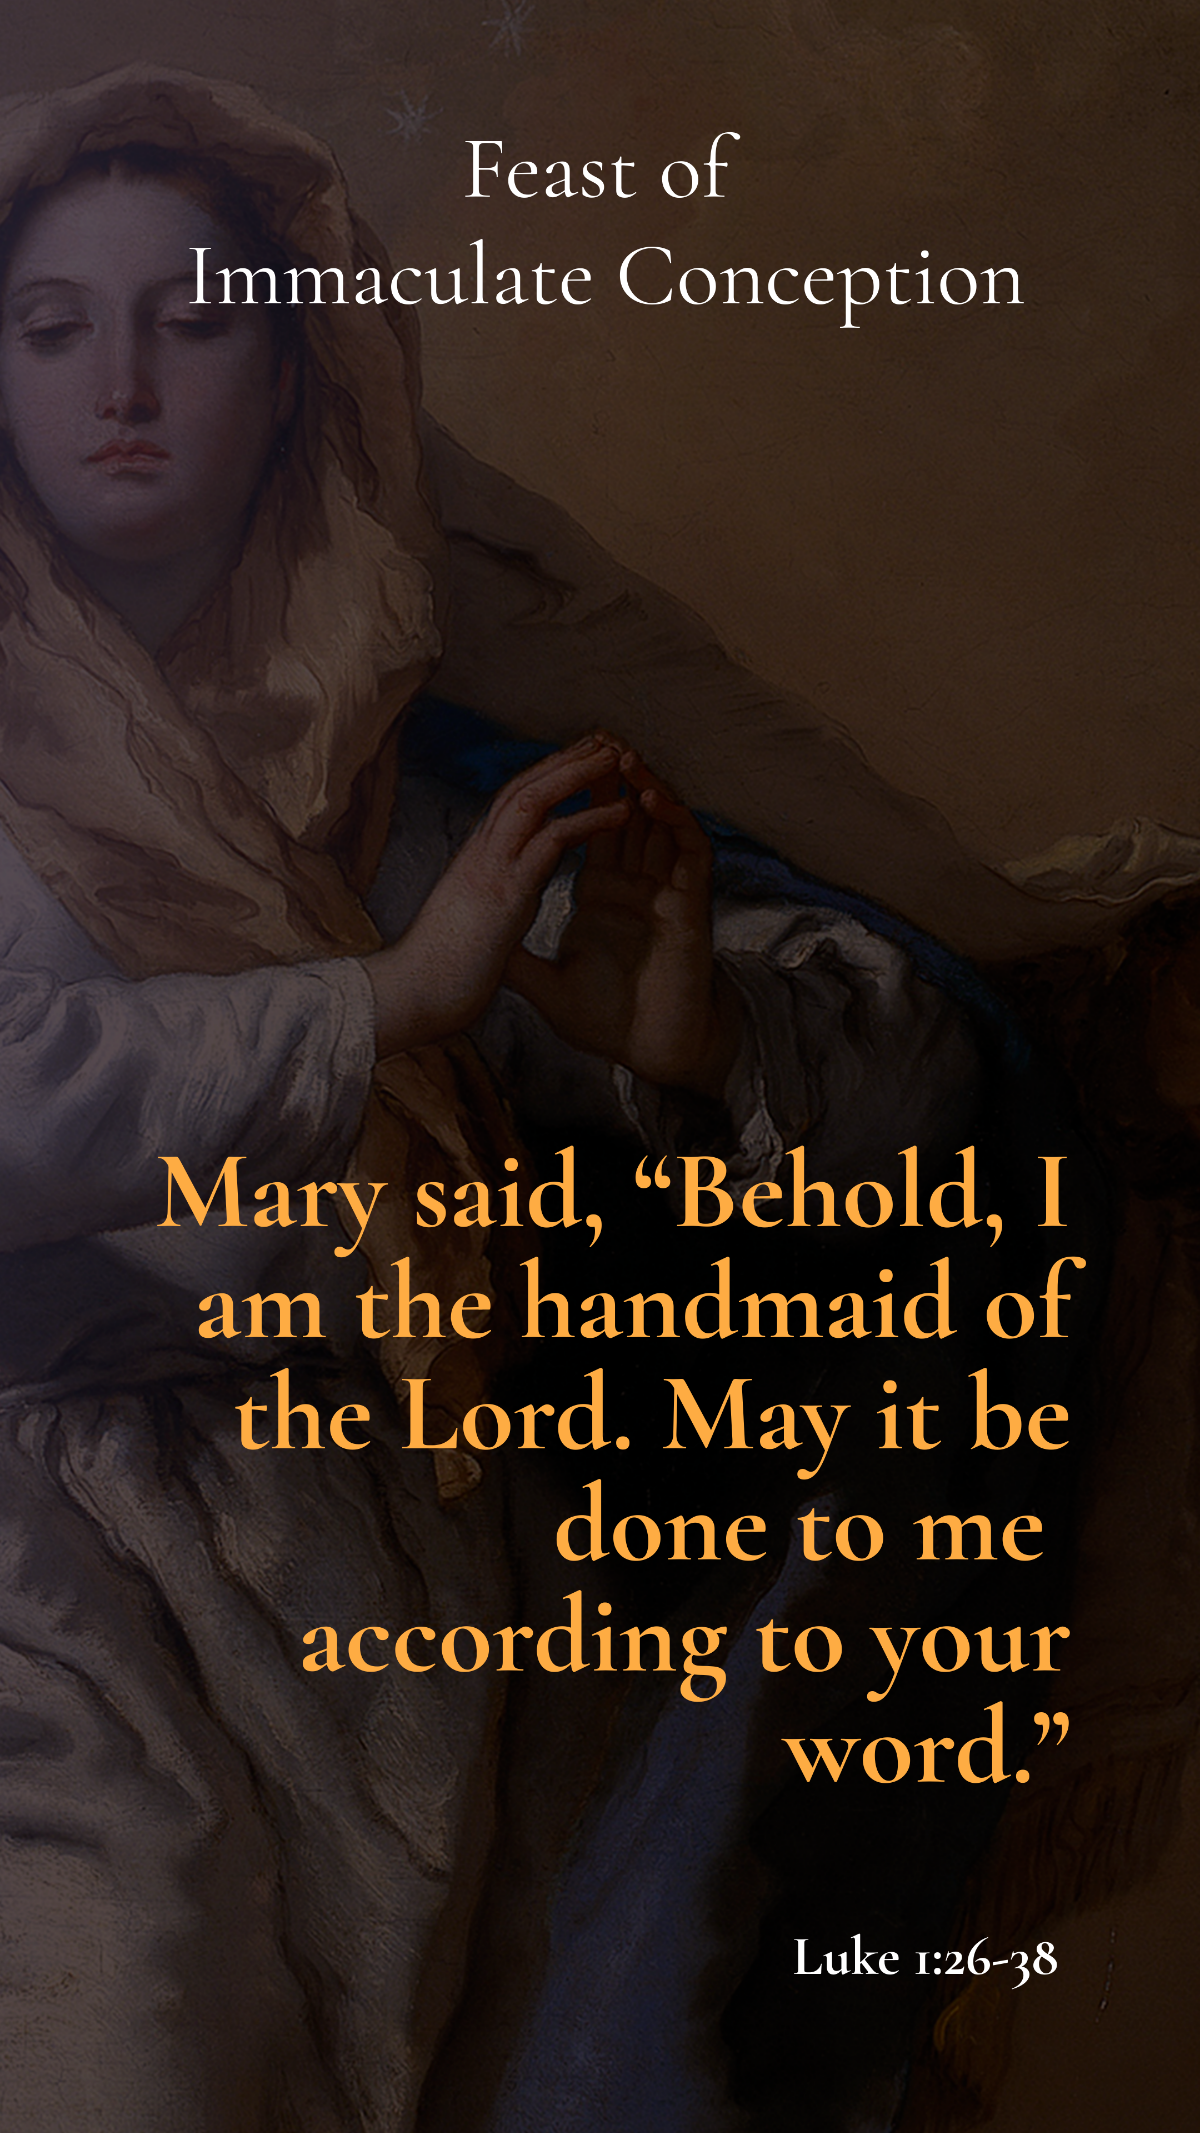 Simple Feast of the Immaculate Conception Quote Template